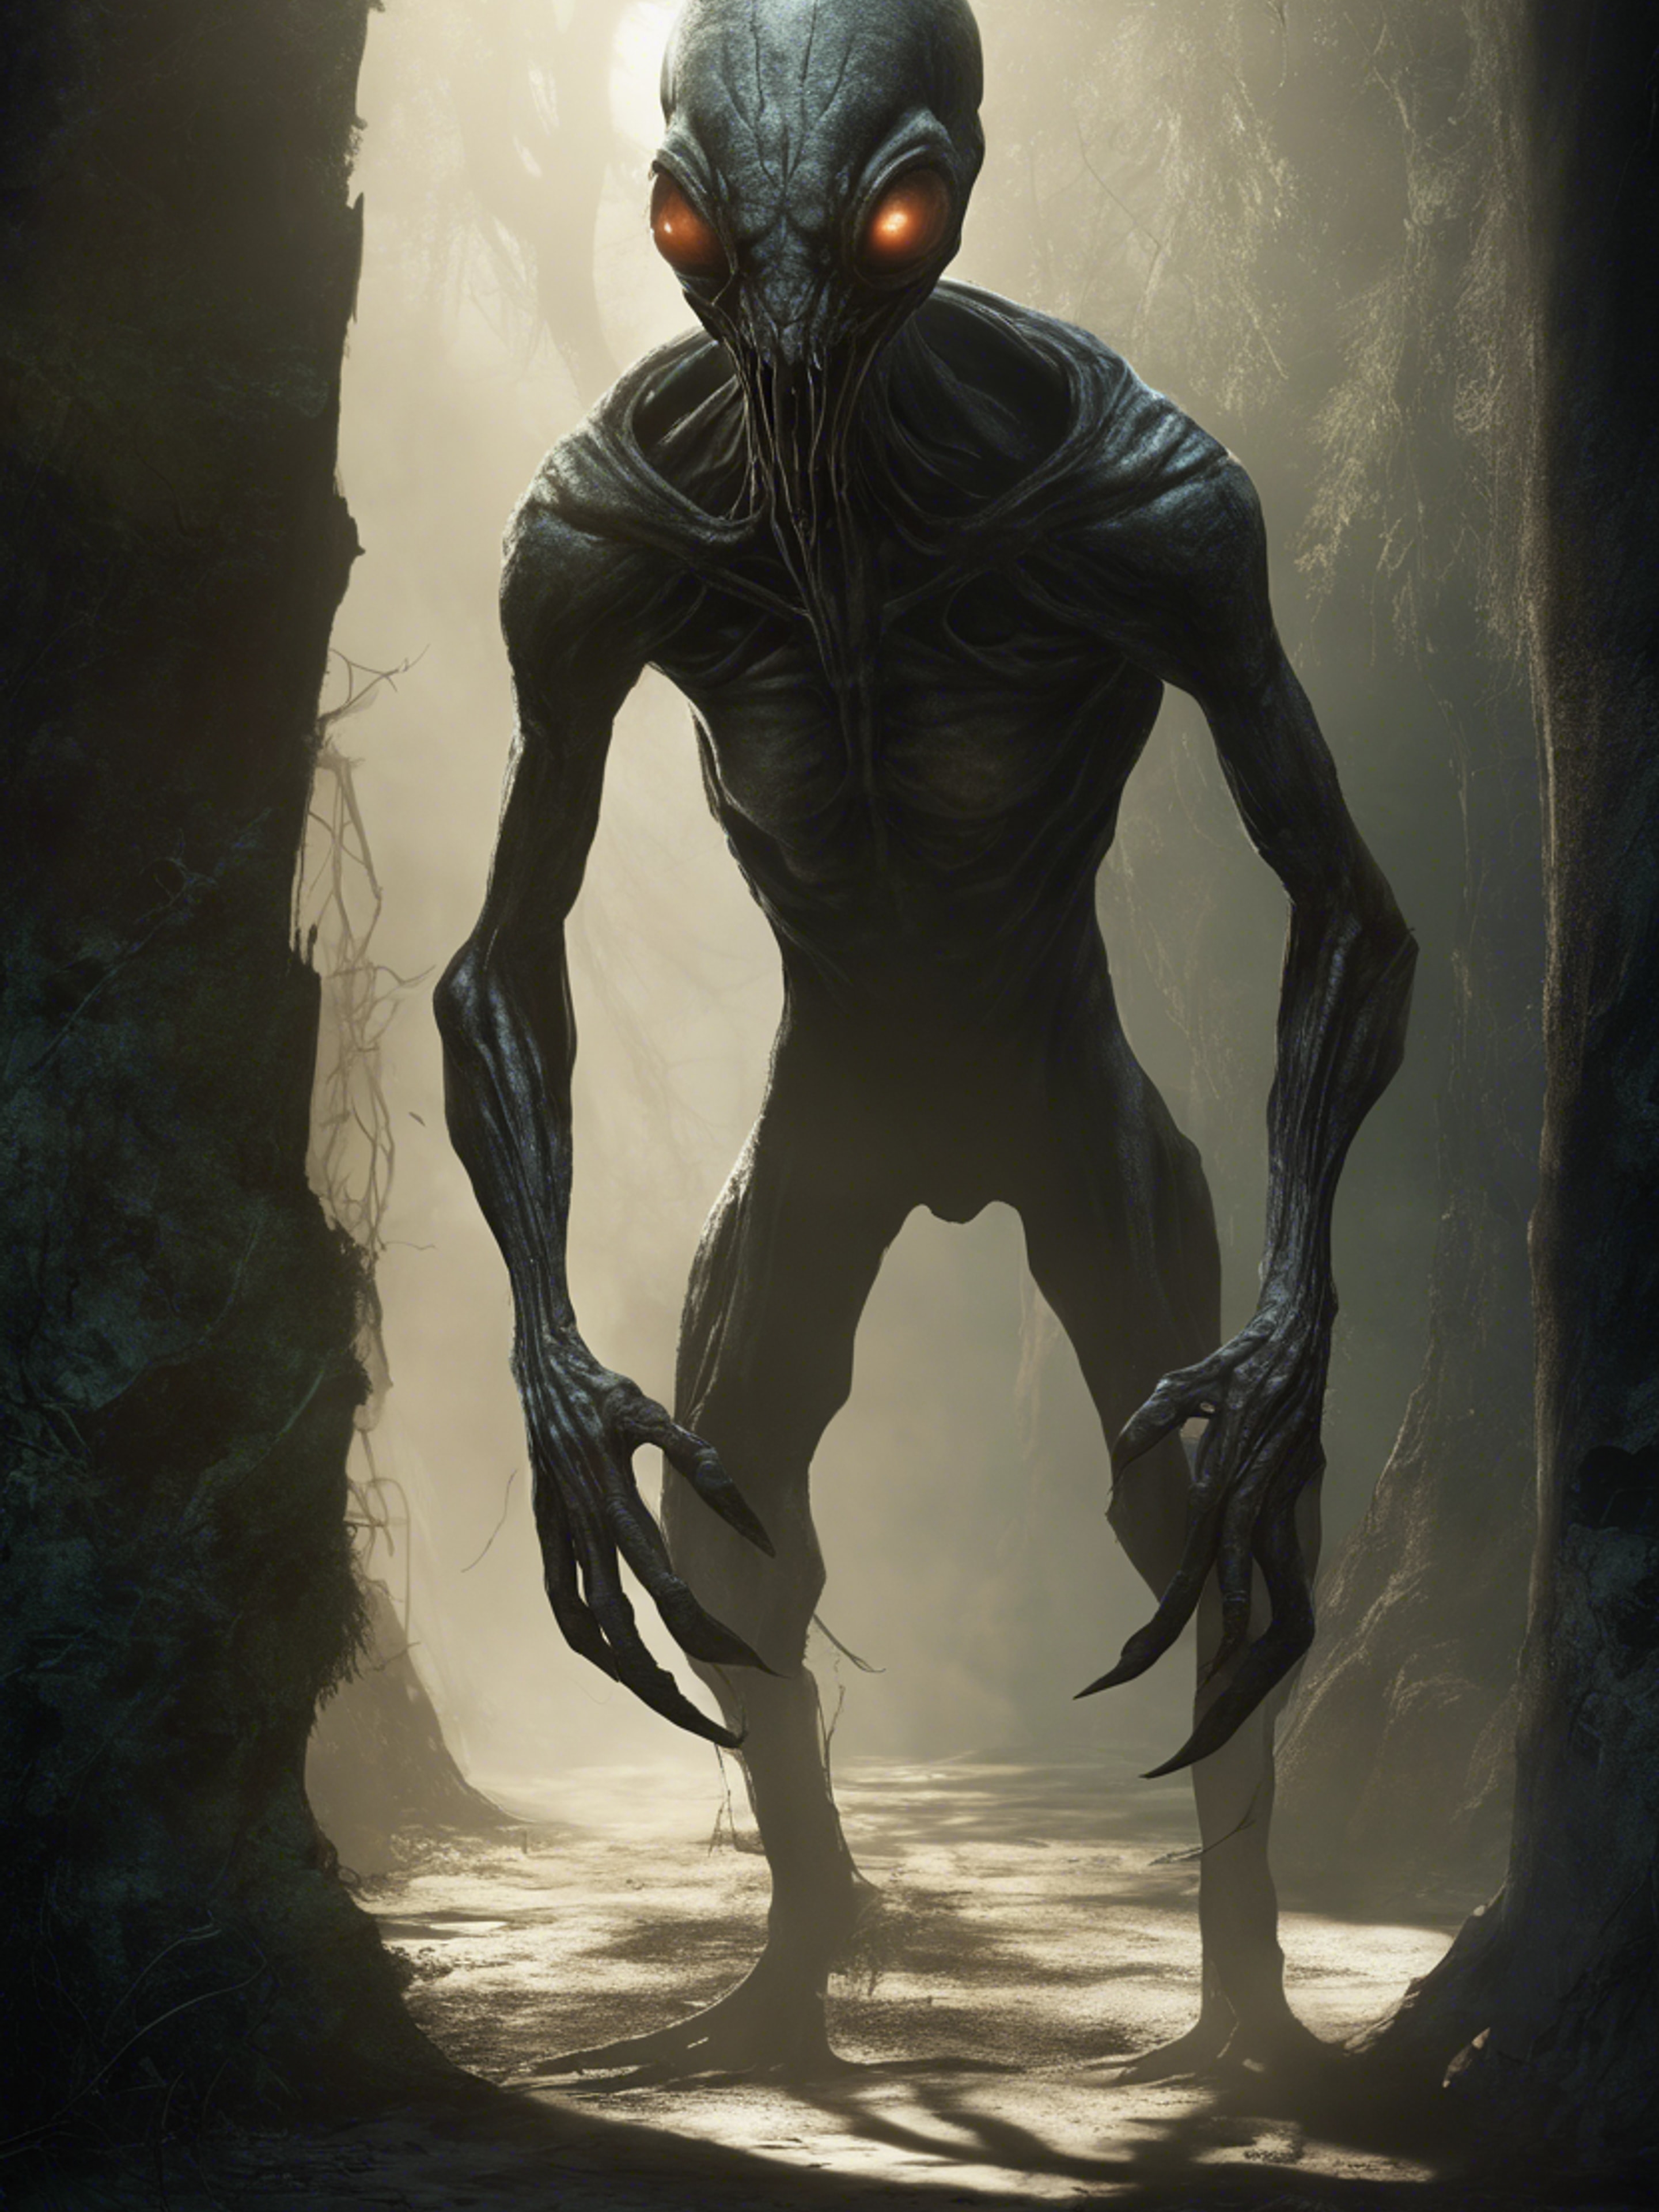 An eerie shot of an alien creature from a sci-fi horror game, emerging from the shadows. ផ្ទាំង​រូបភាព[70e4d6a77d4241508cba]